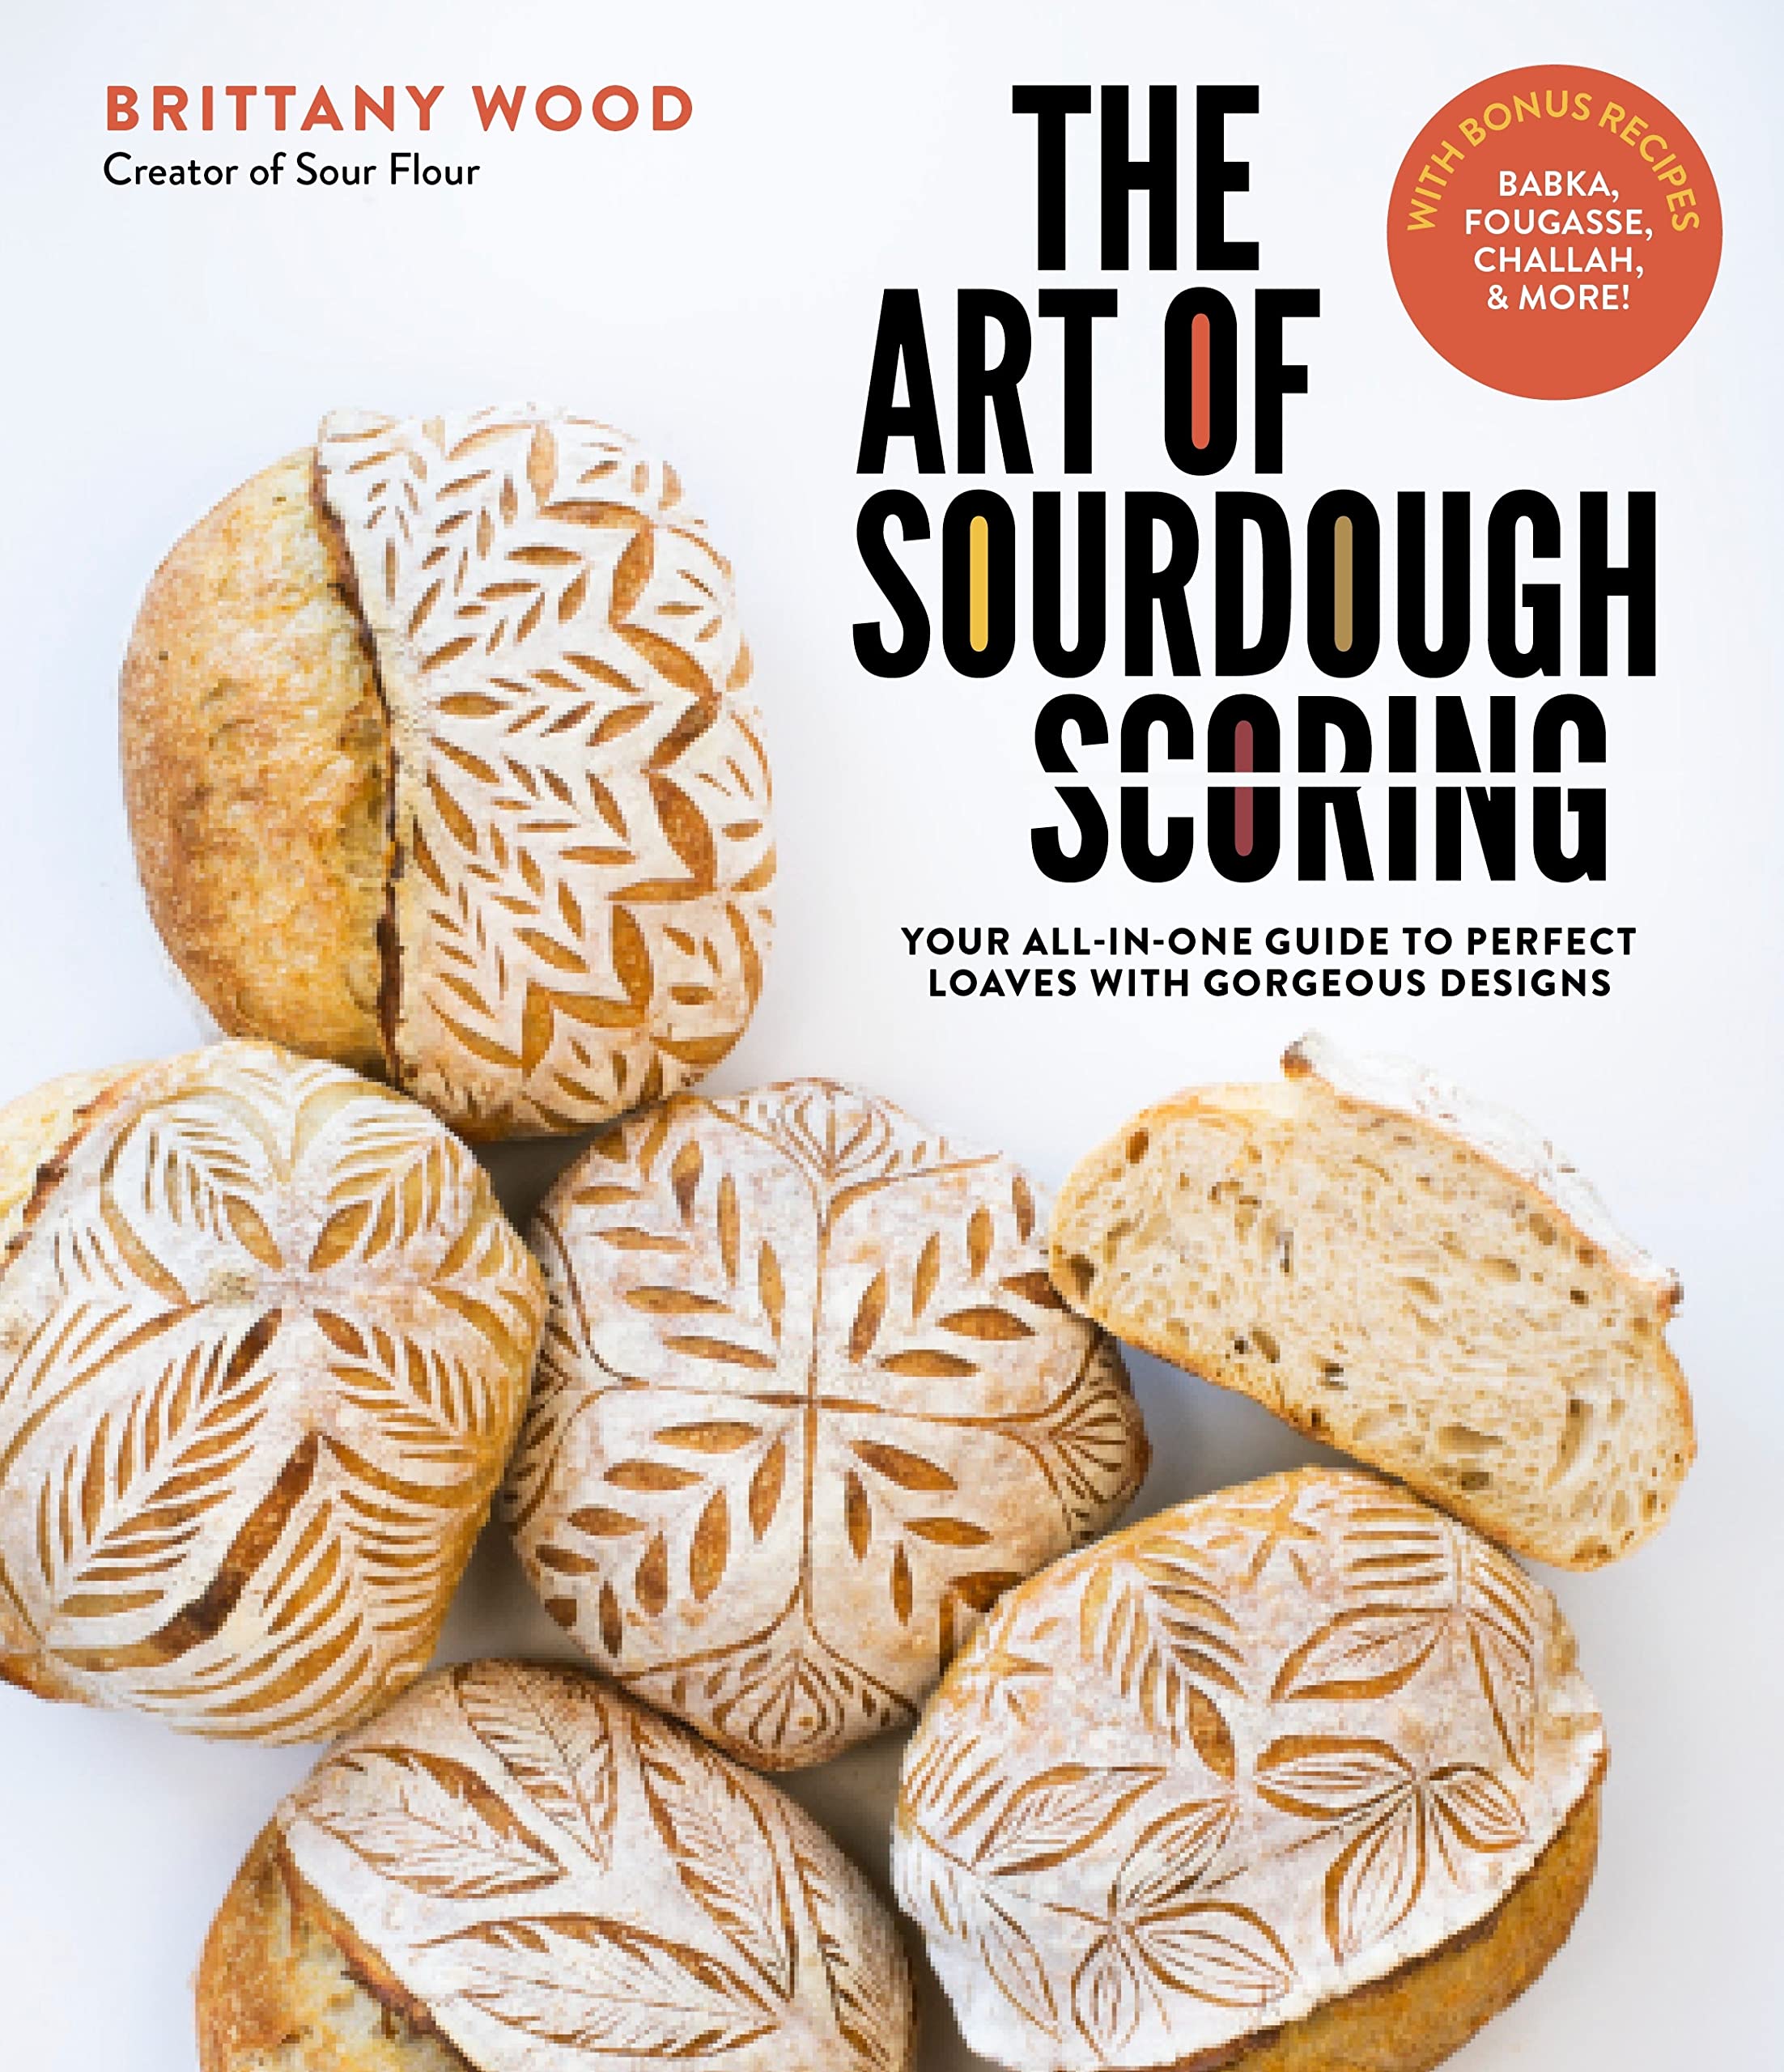 The Art of Sourdough Scoring: Your All-In-One Guide to Perfect Loaves with Gorgeous Designs (Brittany Wood)